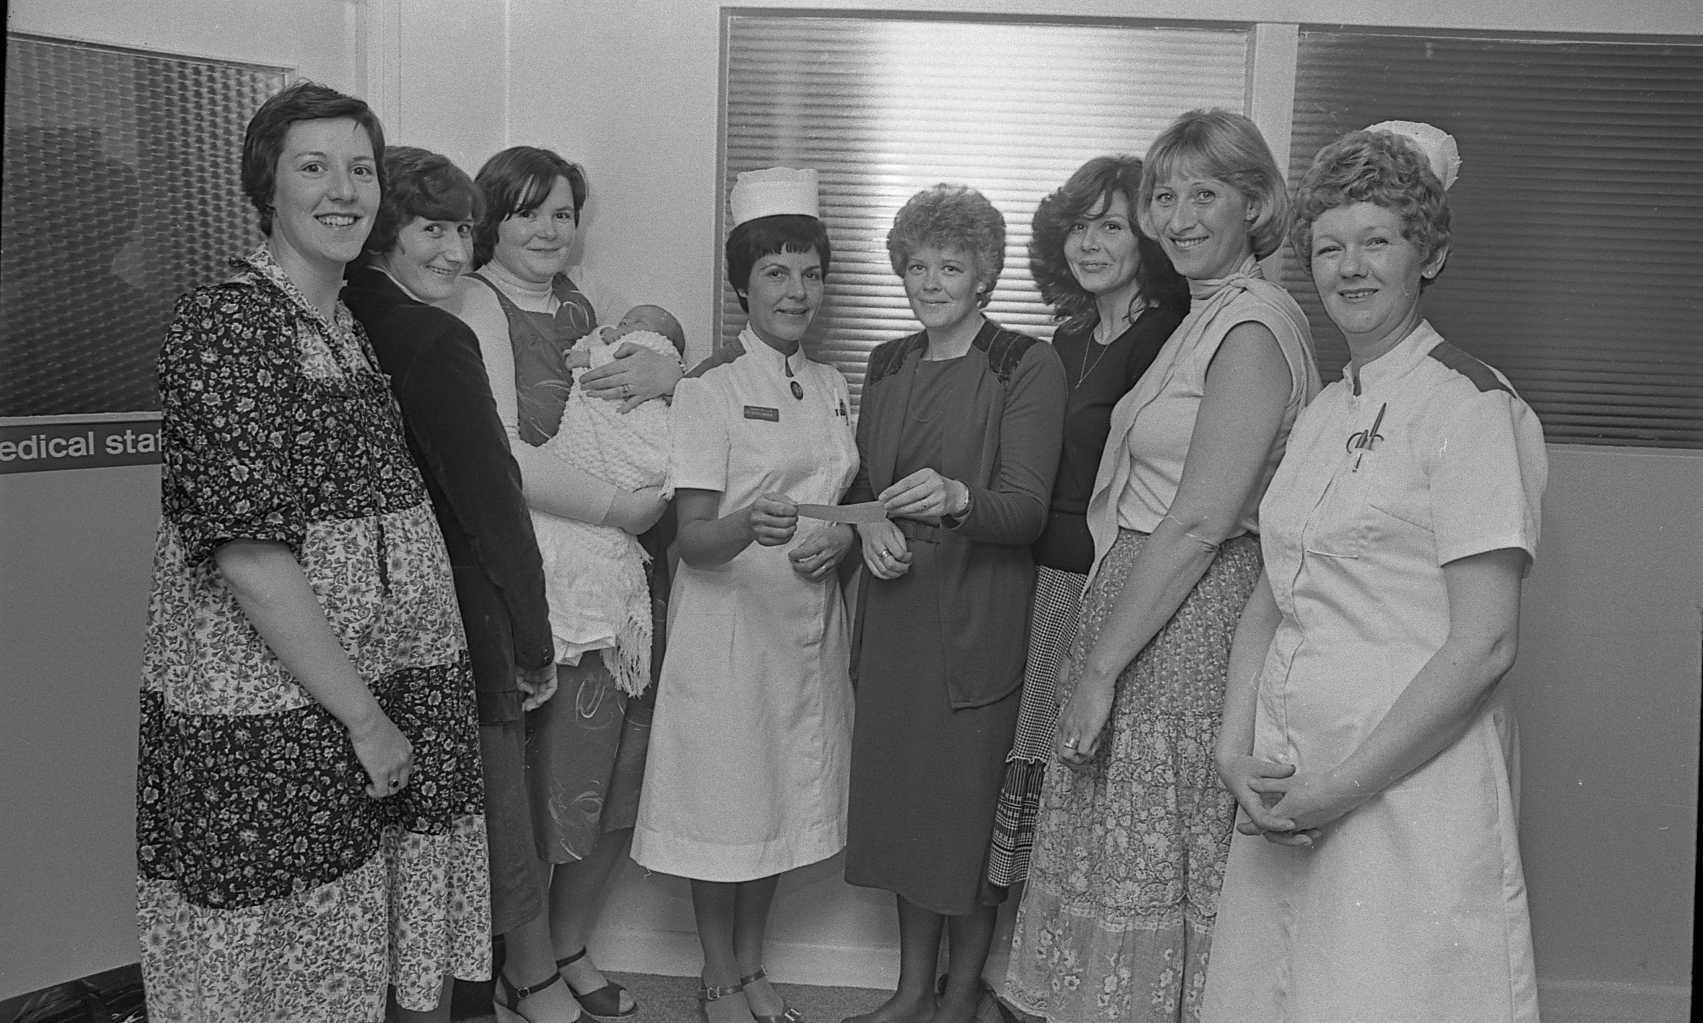 Wrexham Police Ladies present Maelor Hospital with a donation, June 1981.